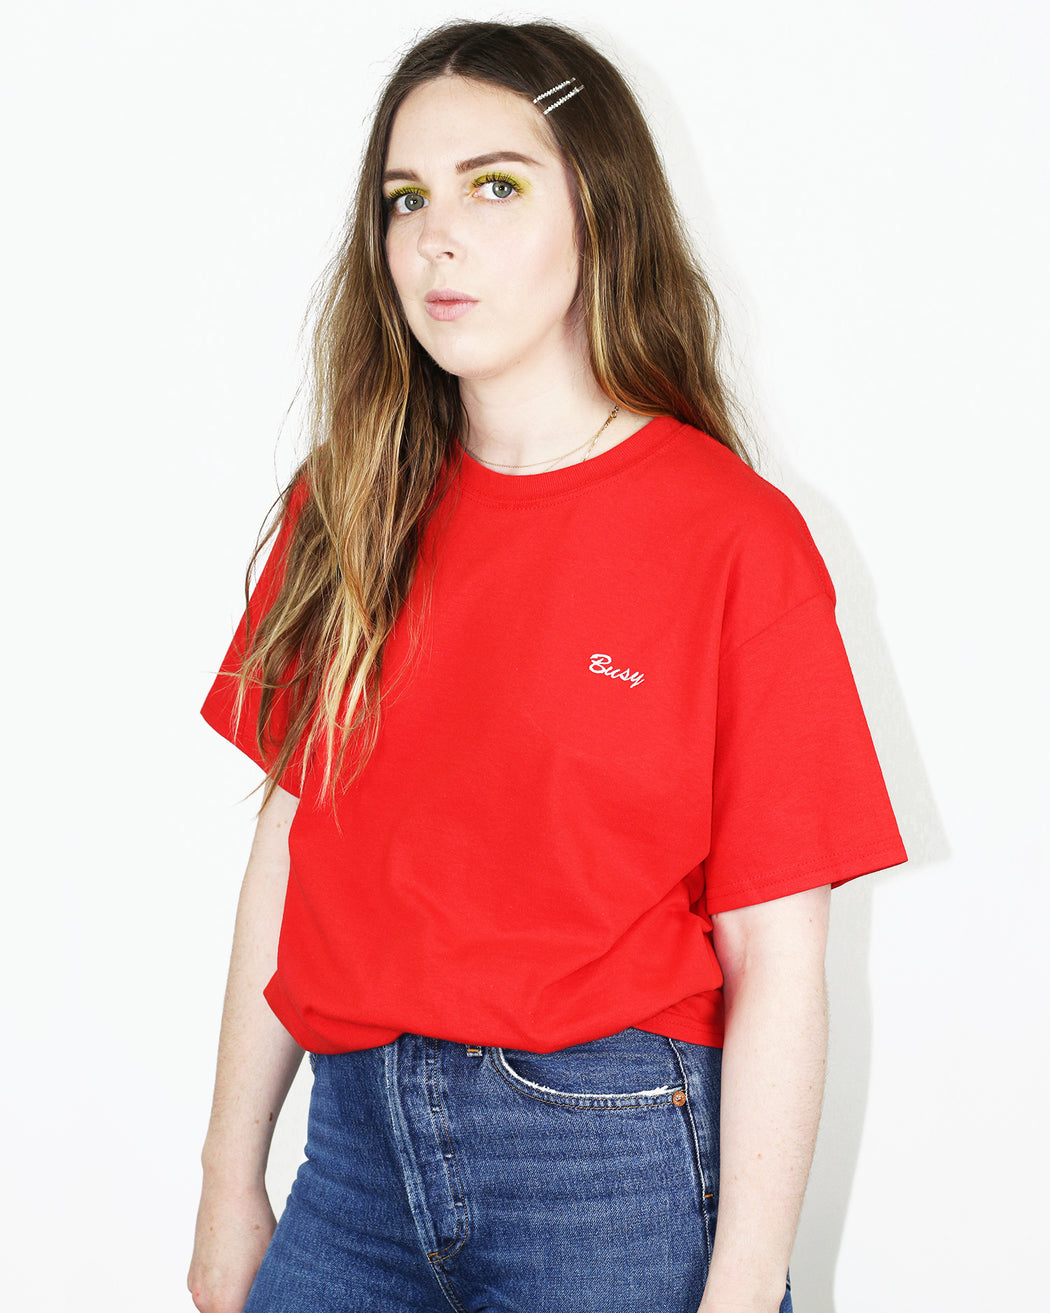 Double Trouble Gang:Busy Tee – White on Red Embroidery,ANOMIE